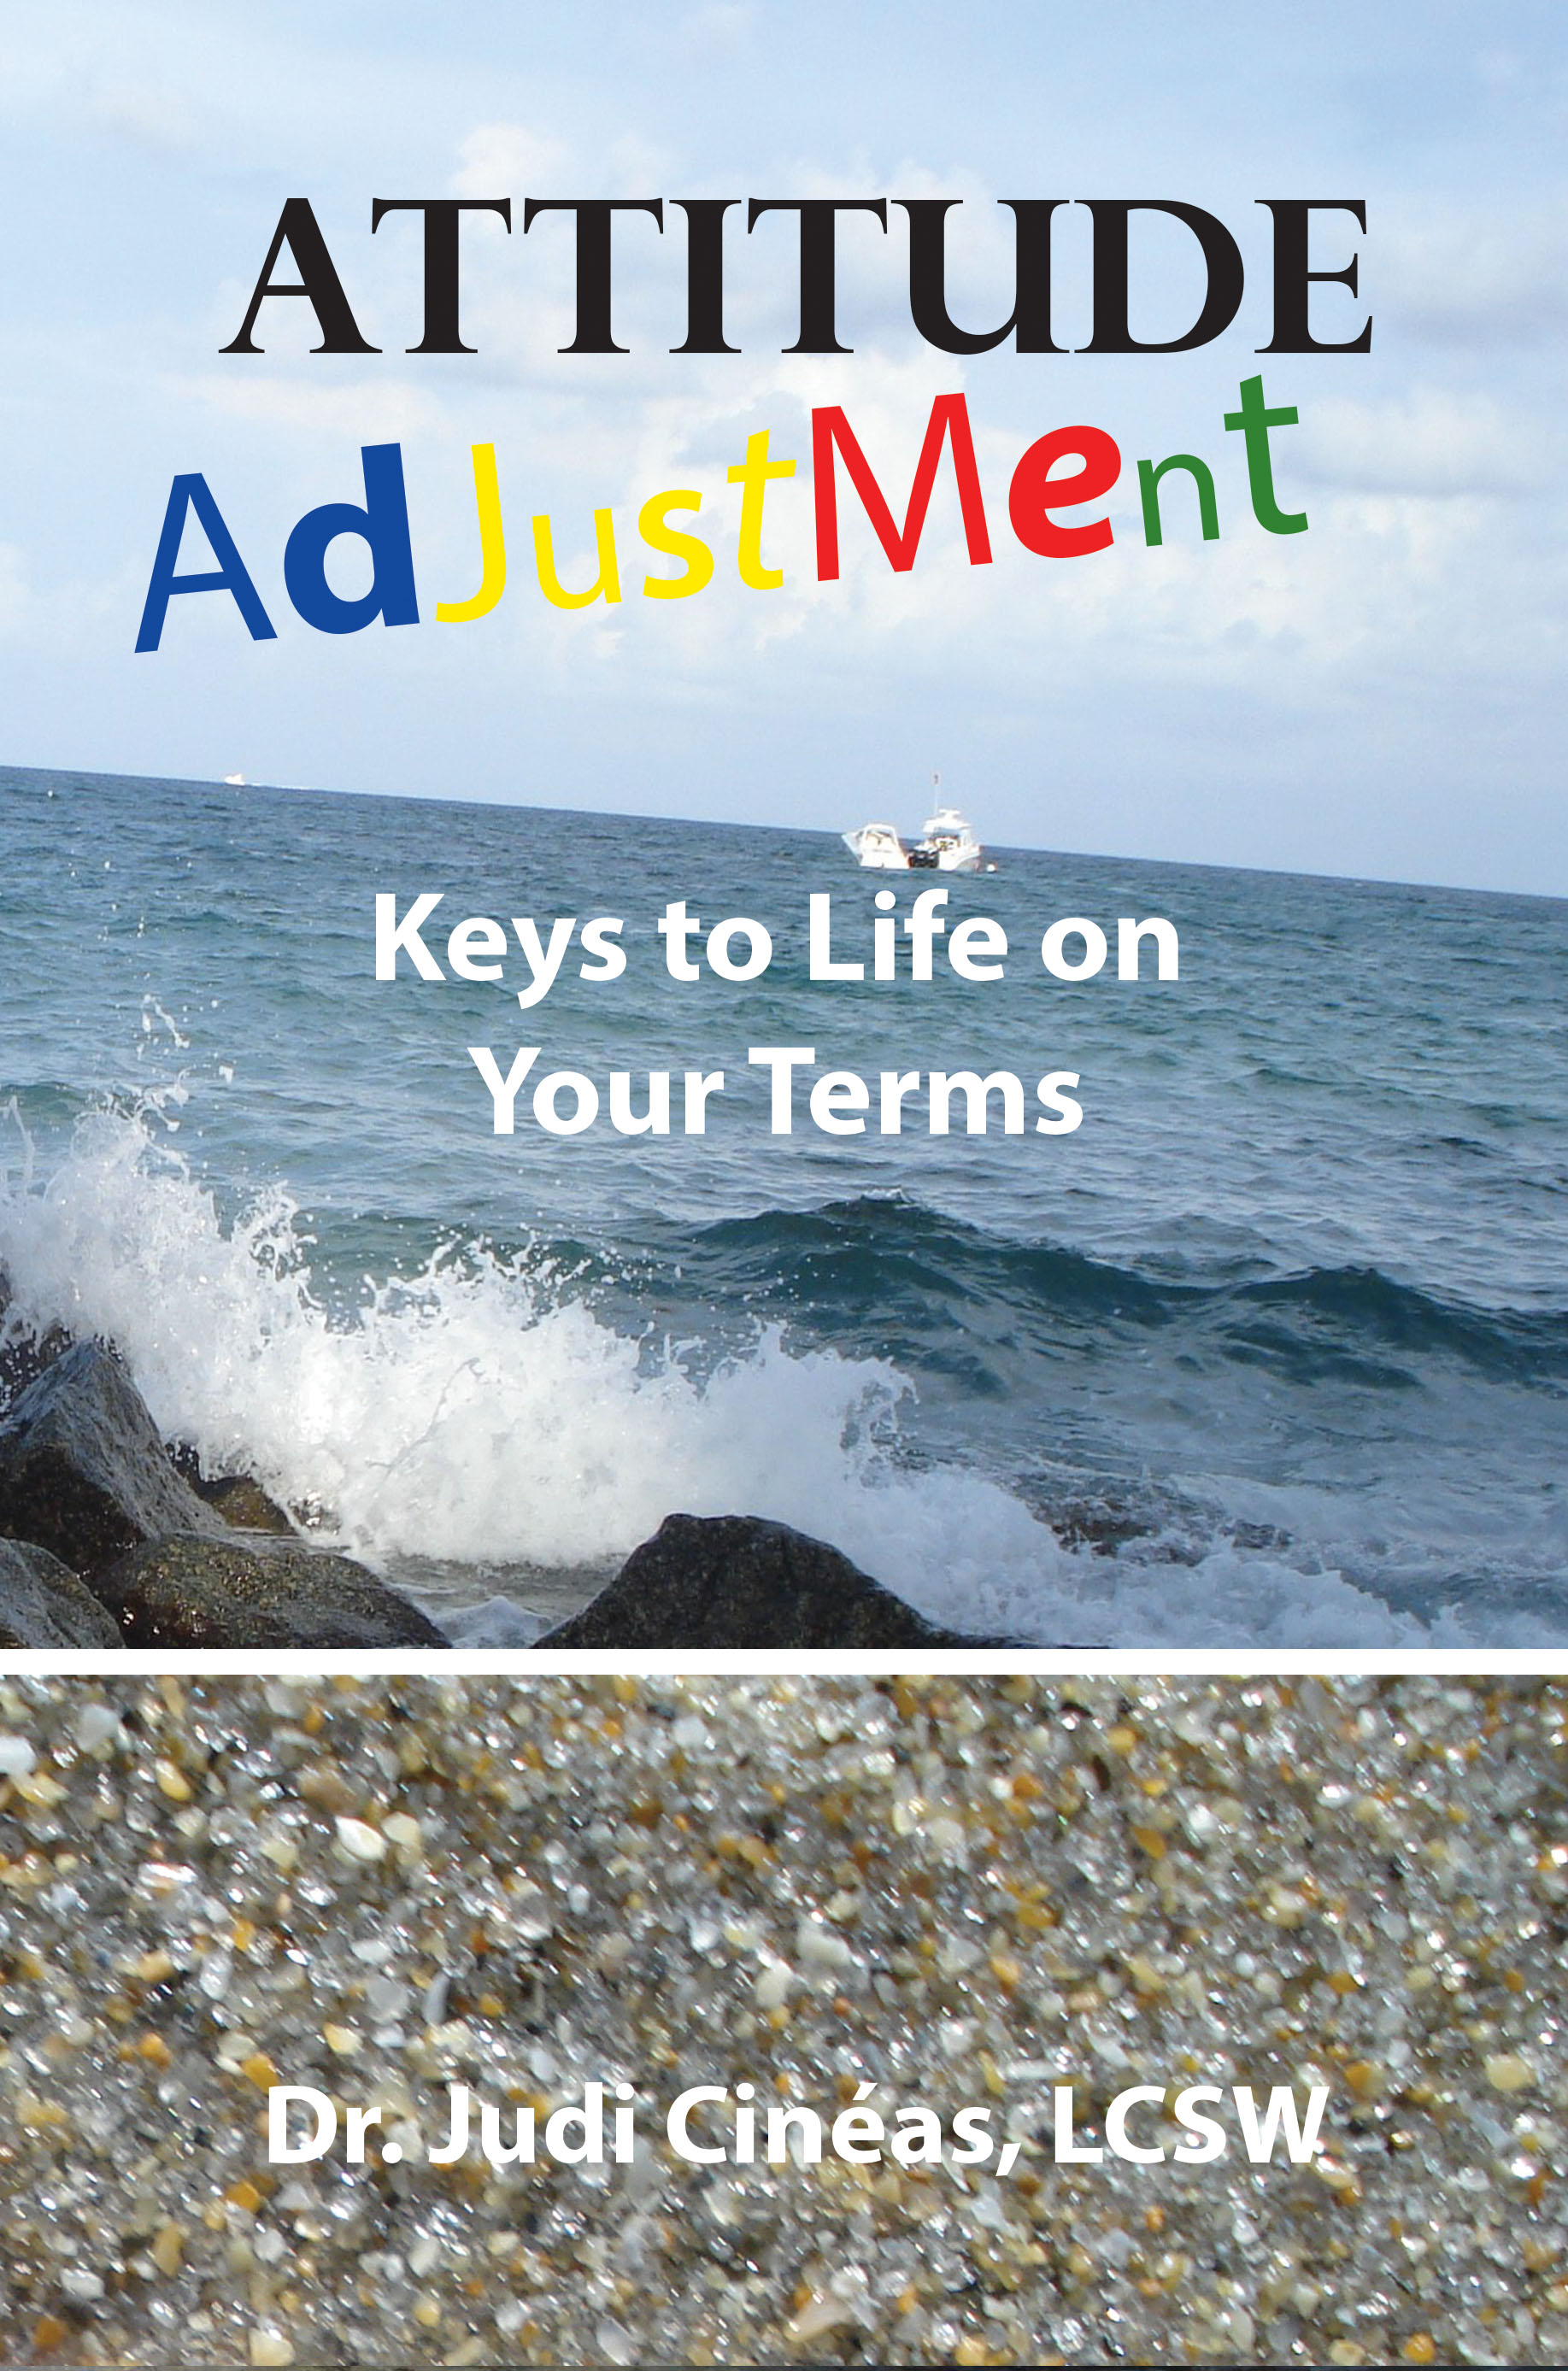 Attitude Adjustment: Keys to Life on Your Terms